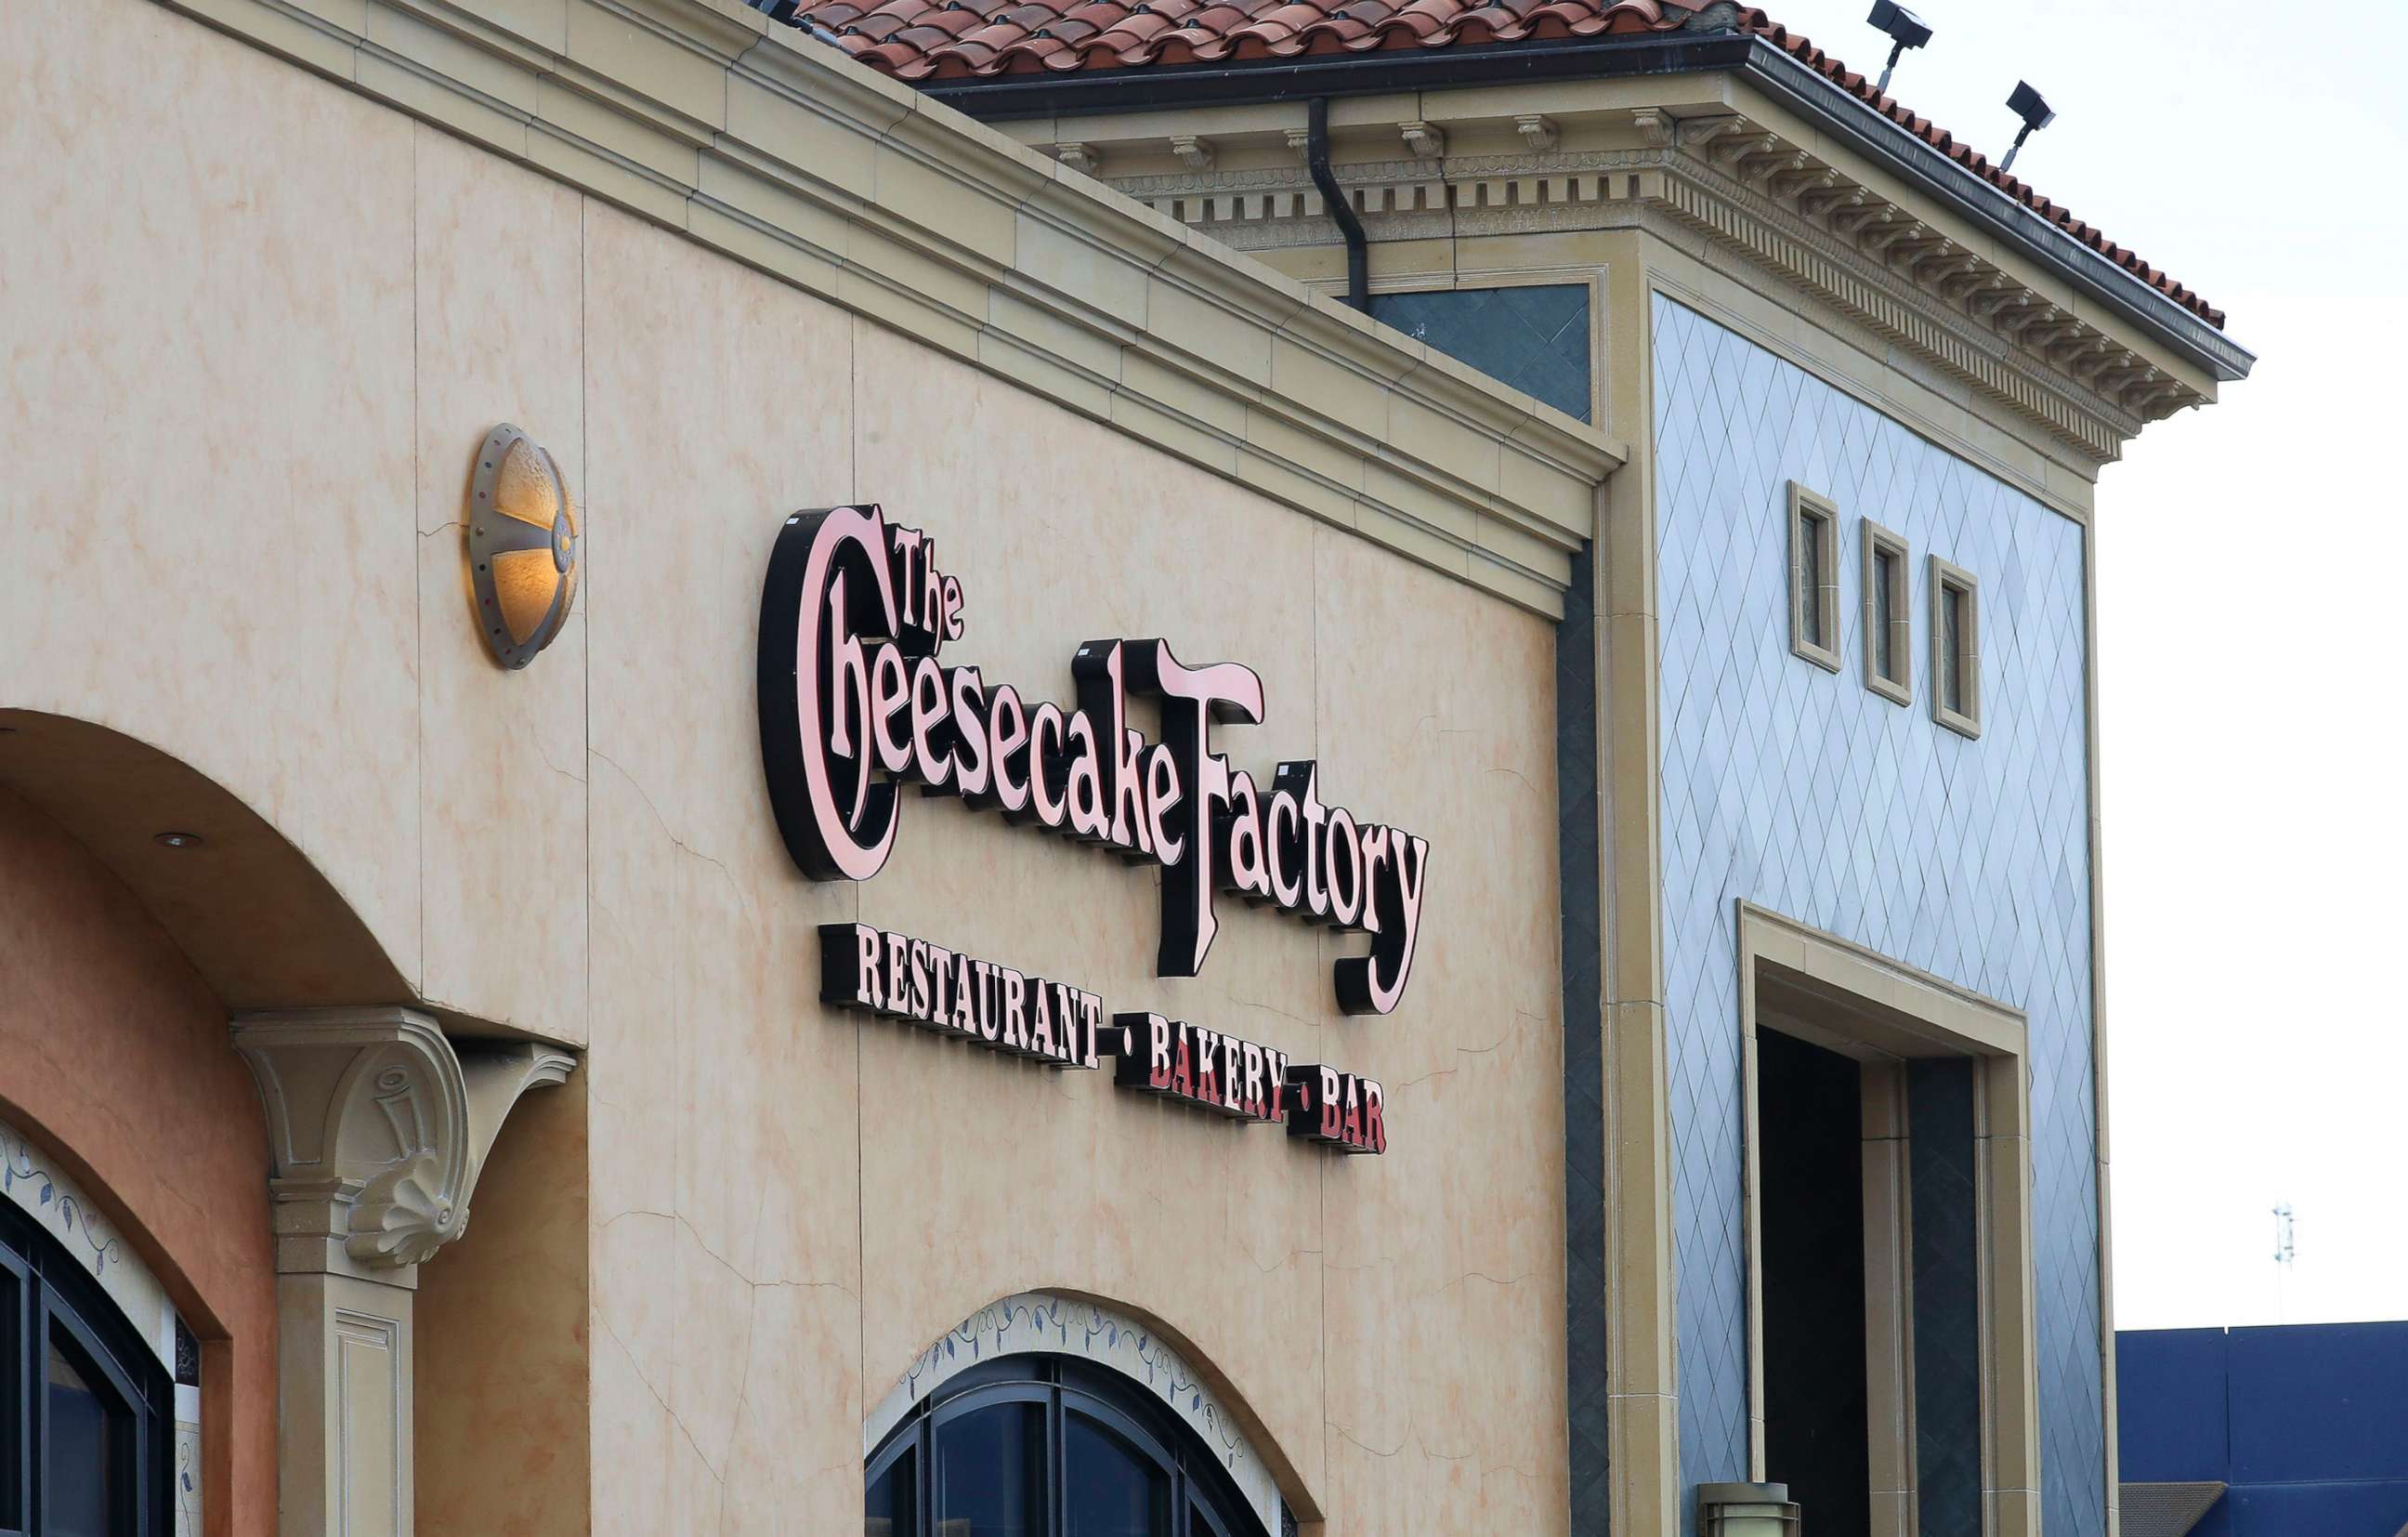 PHOTO: In this March 26, 2020, file photo, a Cheesecake Factory restaurant is shown in Louisville, Ky.